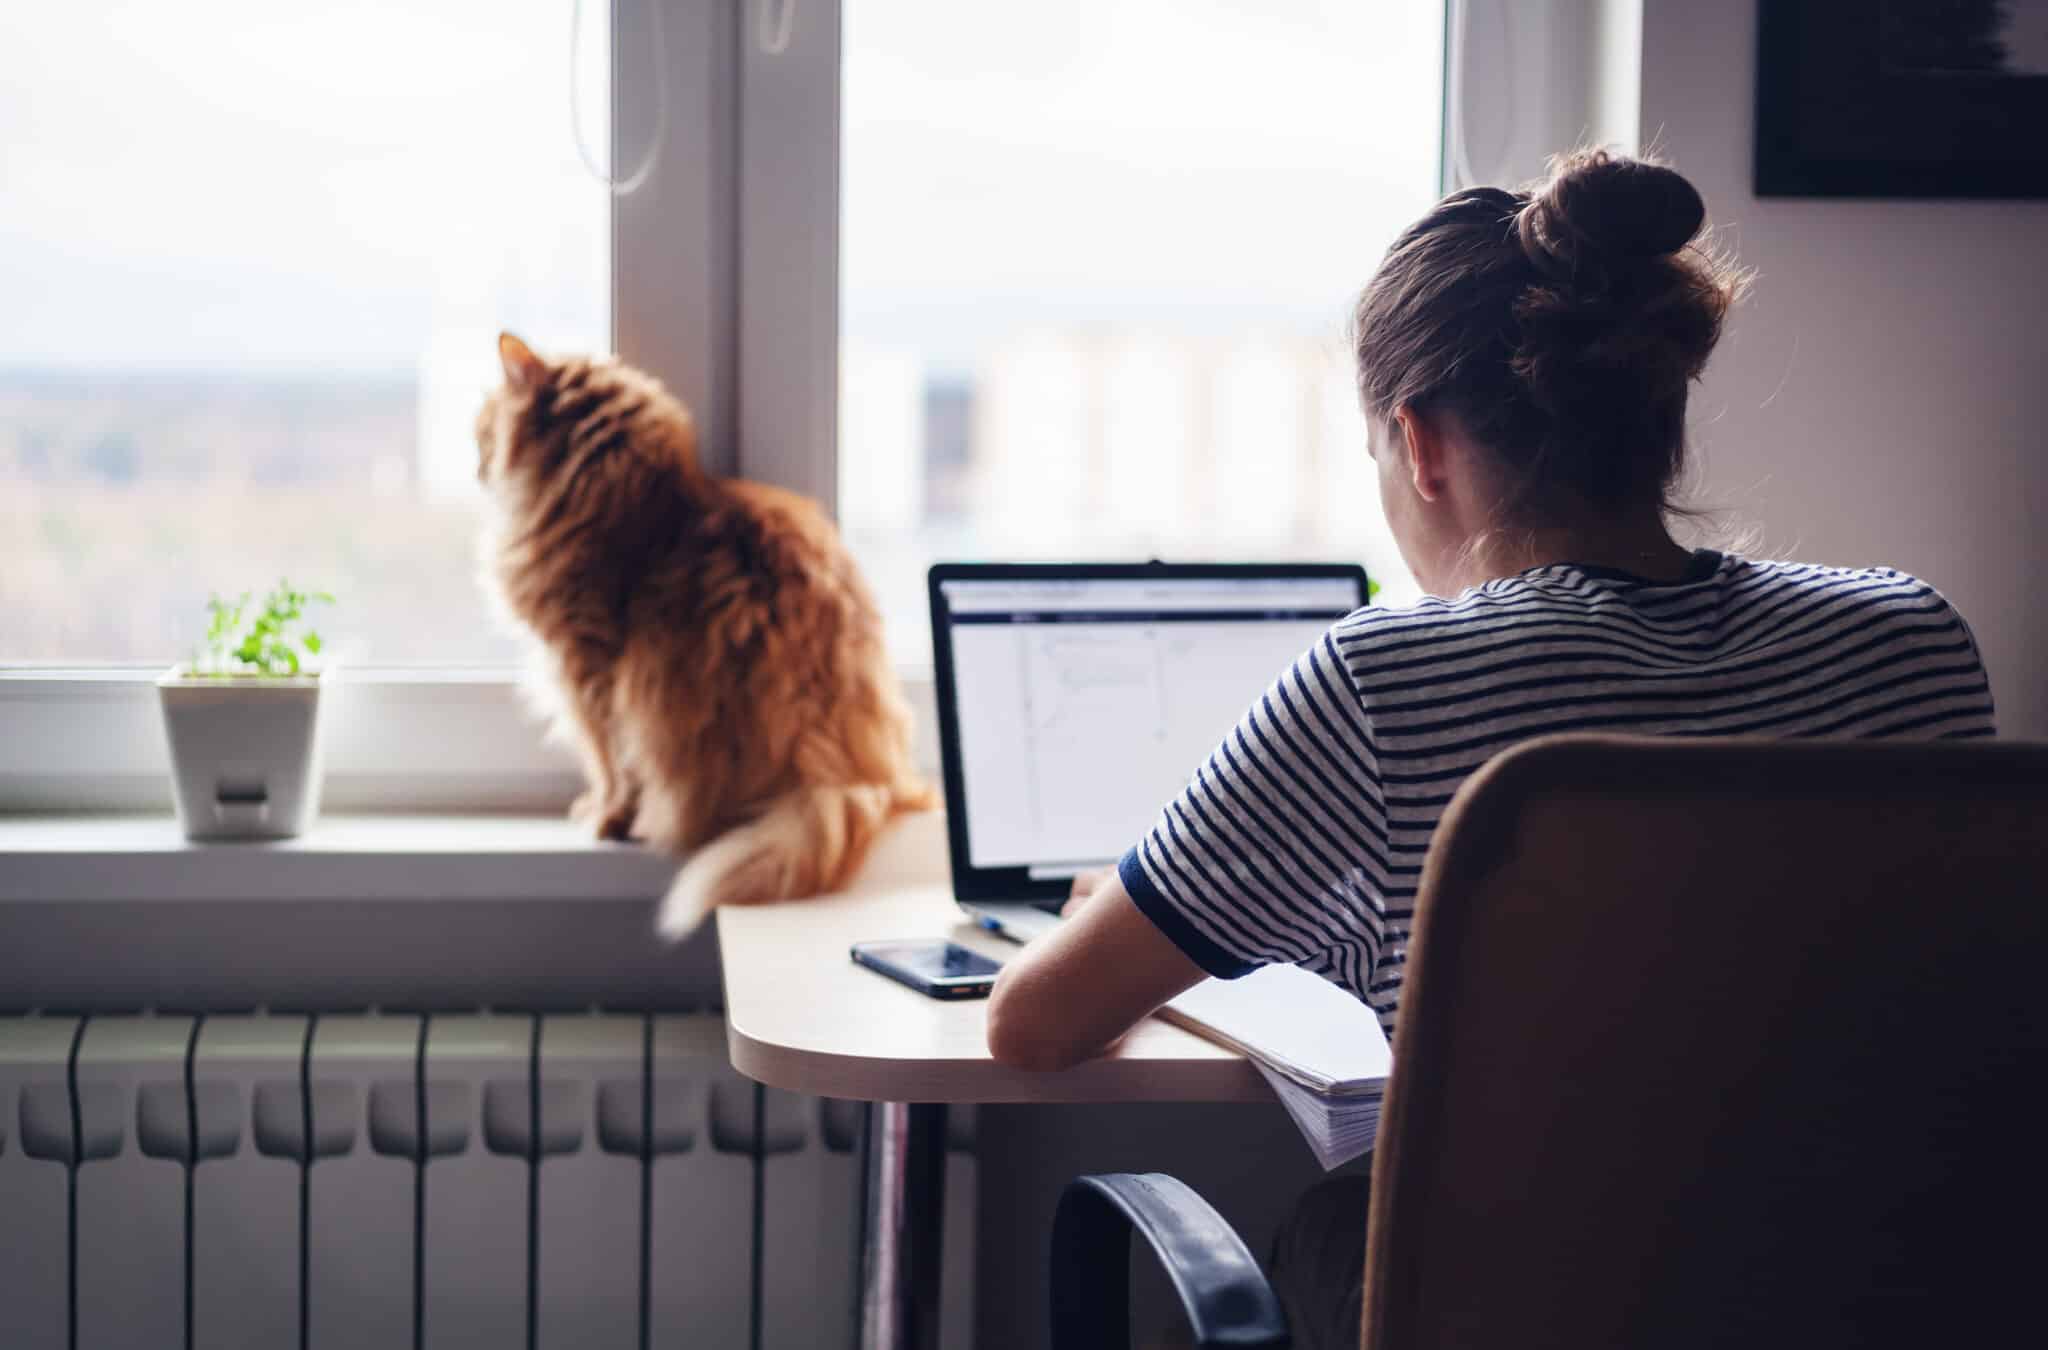 Athreon freelancer working from home on a laptop with her cat sitting on the window sill beside her.